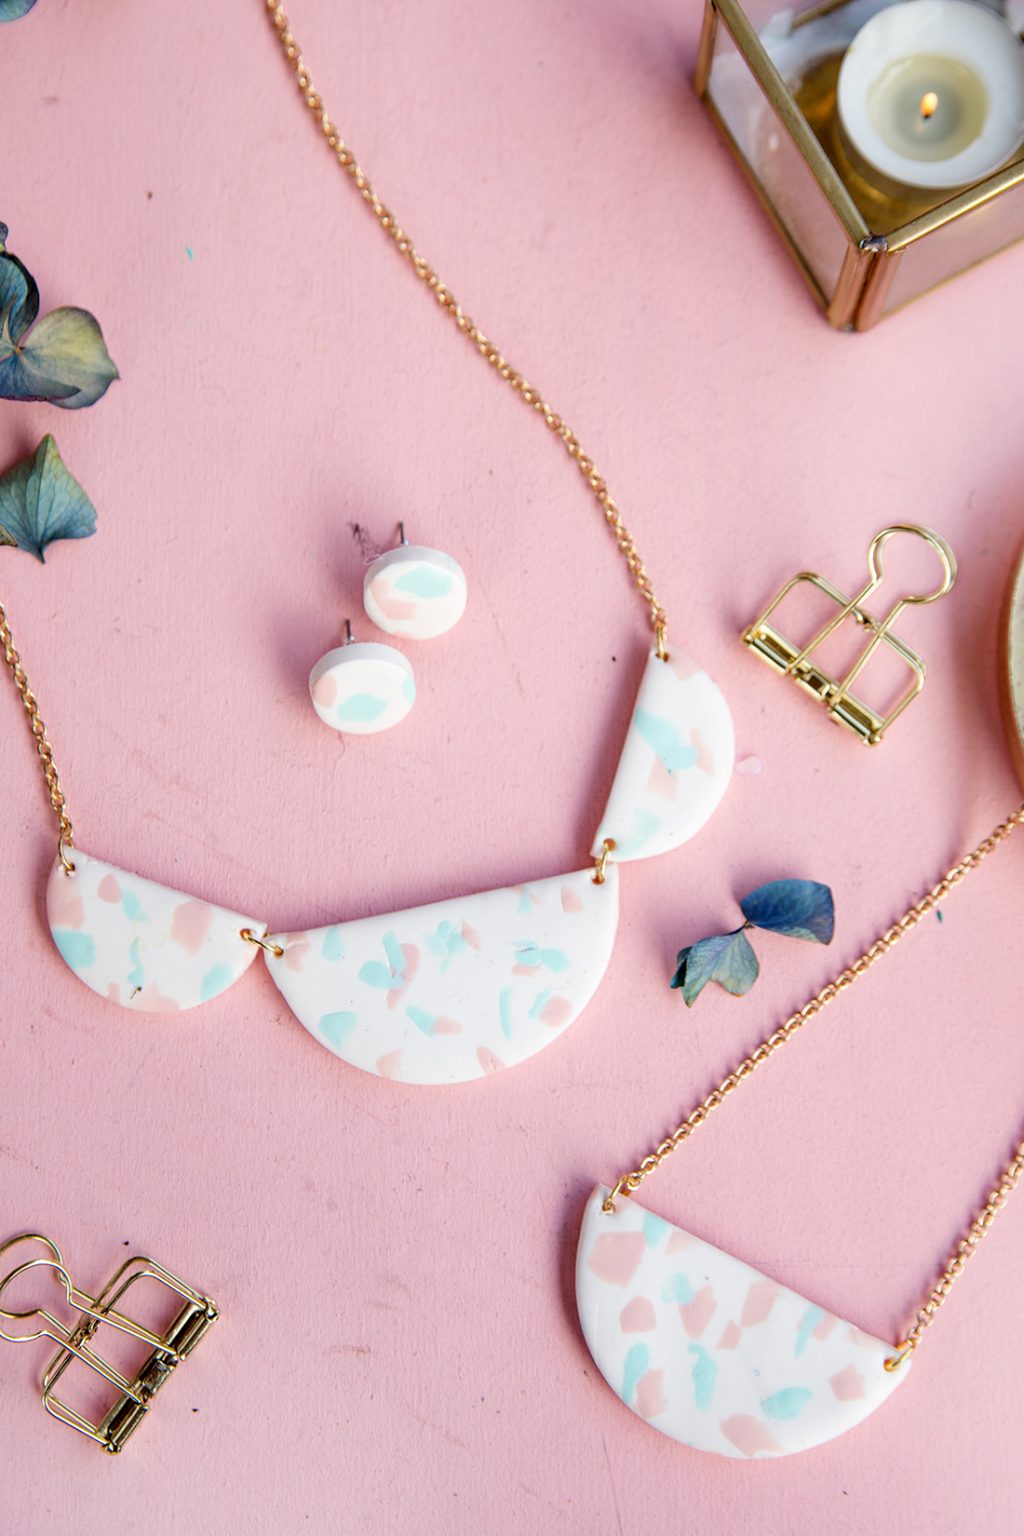 15 Polymer Clay Jewelry Ideas You Need to Try